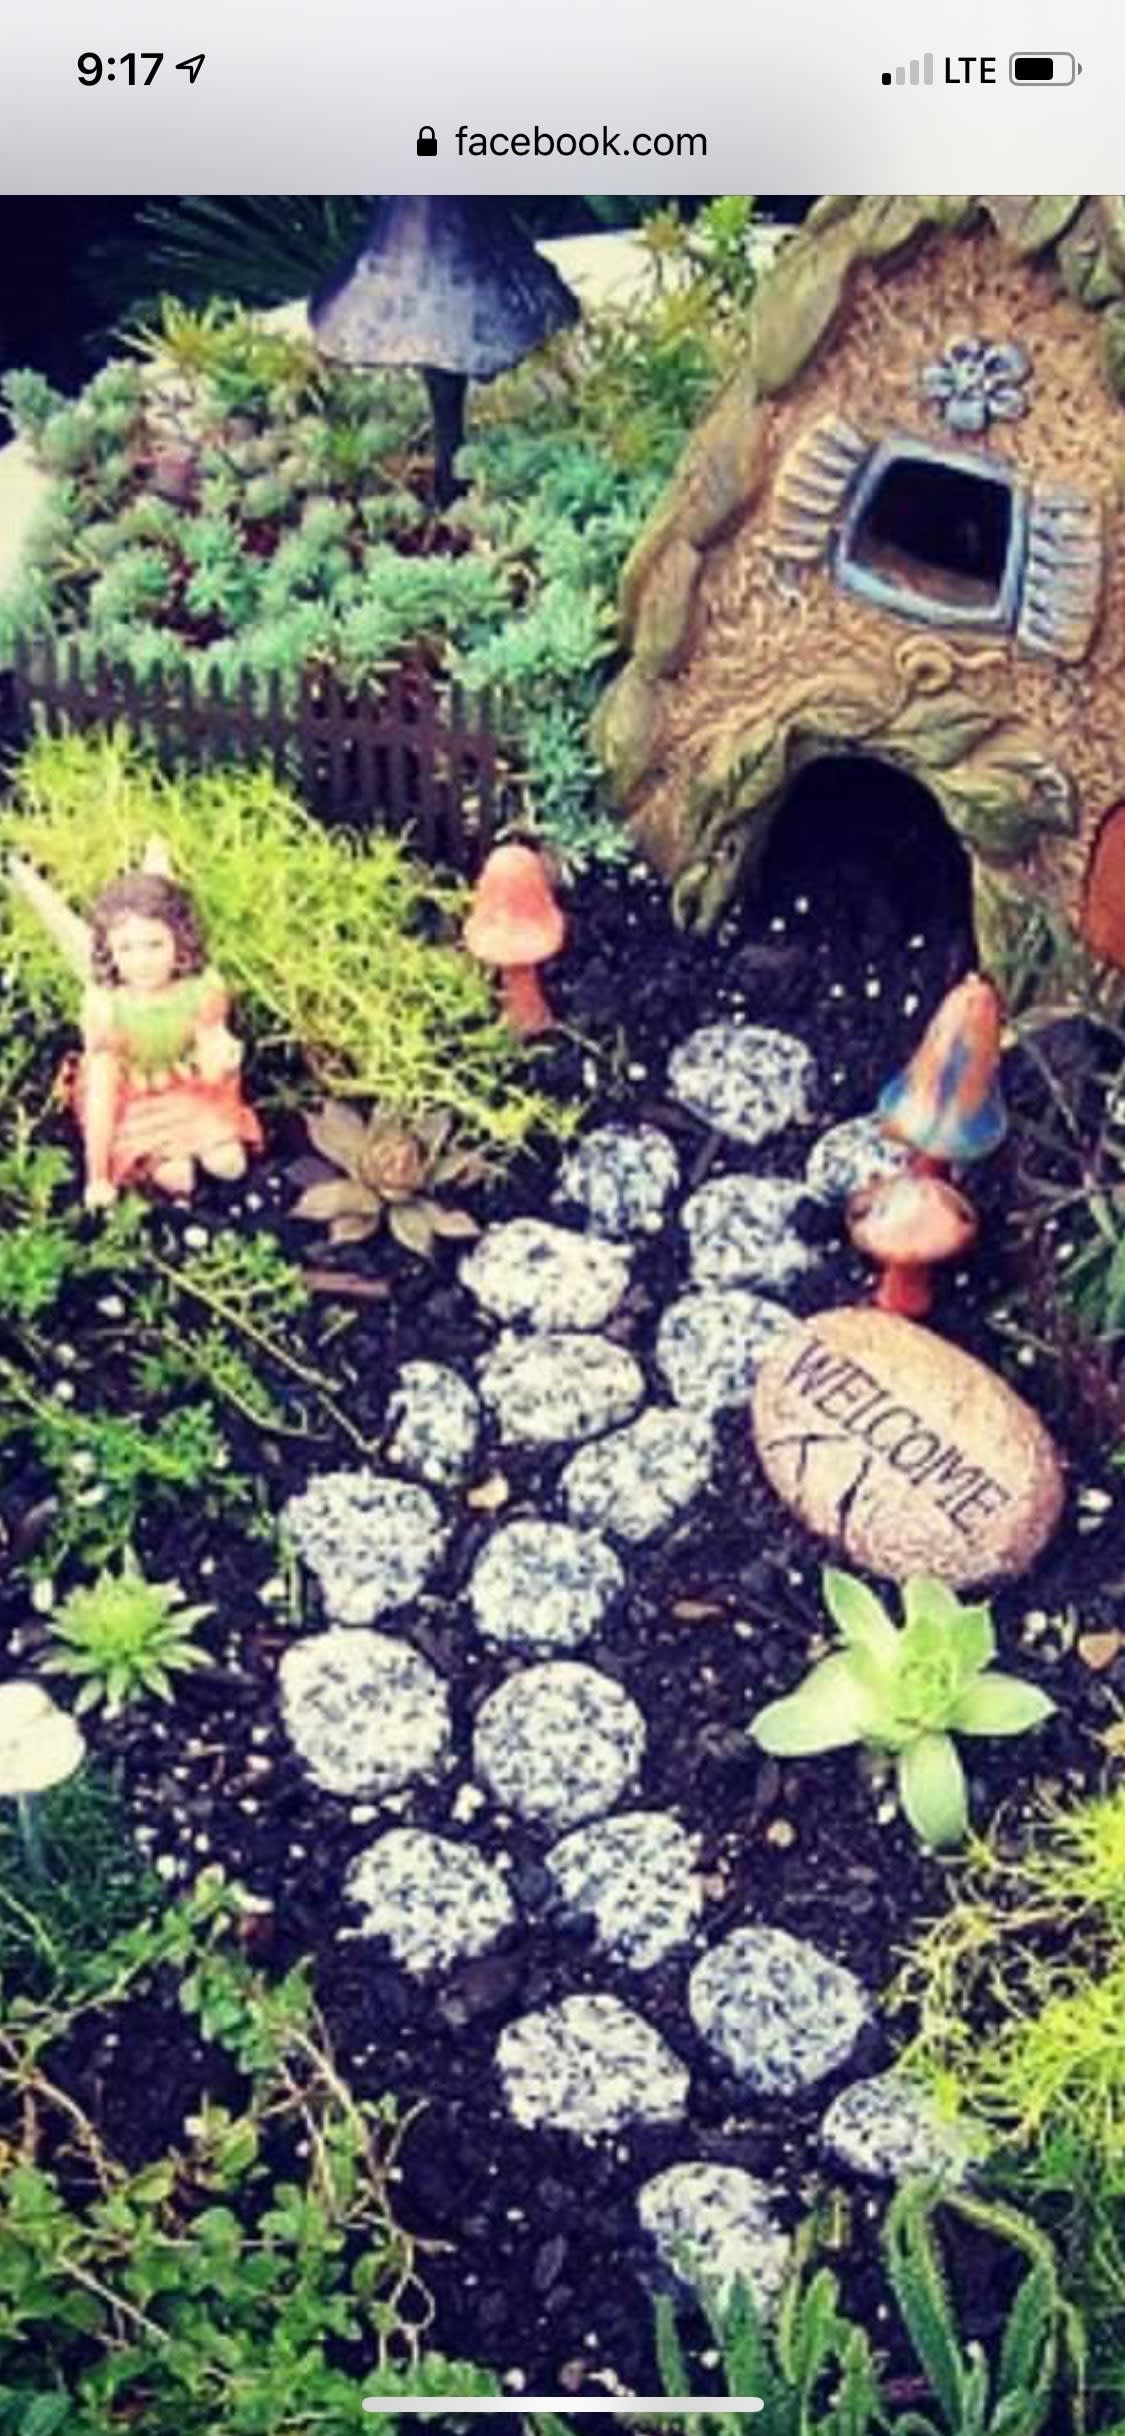 Fairy Garden kit - A perfect gift for a special Grandchild that you miss or child that is in isolation, a birthday child, even an adult that loves fairy gardens. The kit will include everything you need and will be fun to put together. It will be delivered with strict safety precautions.